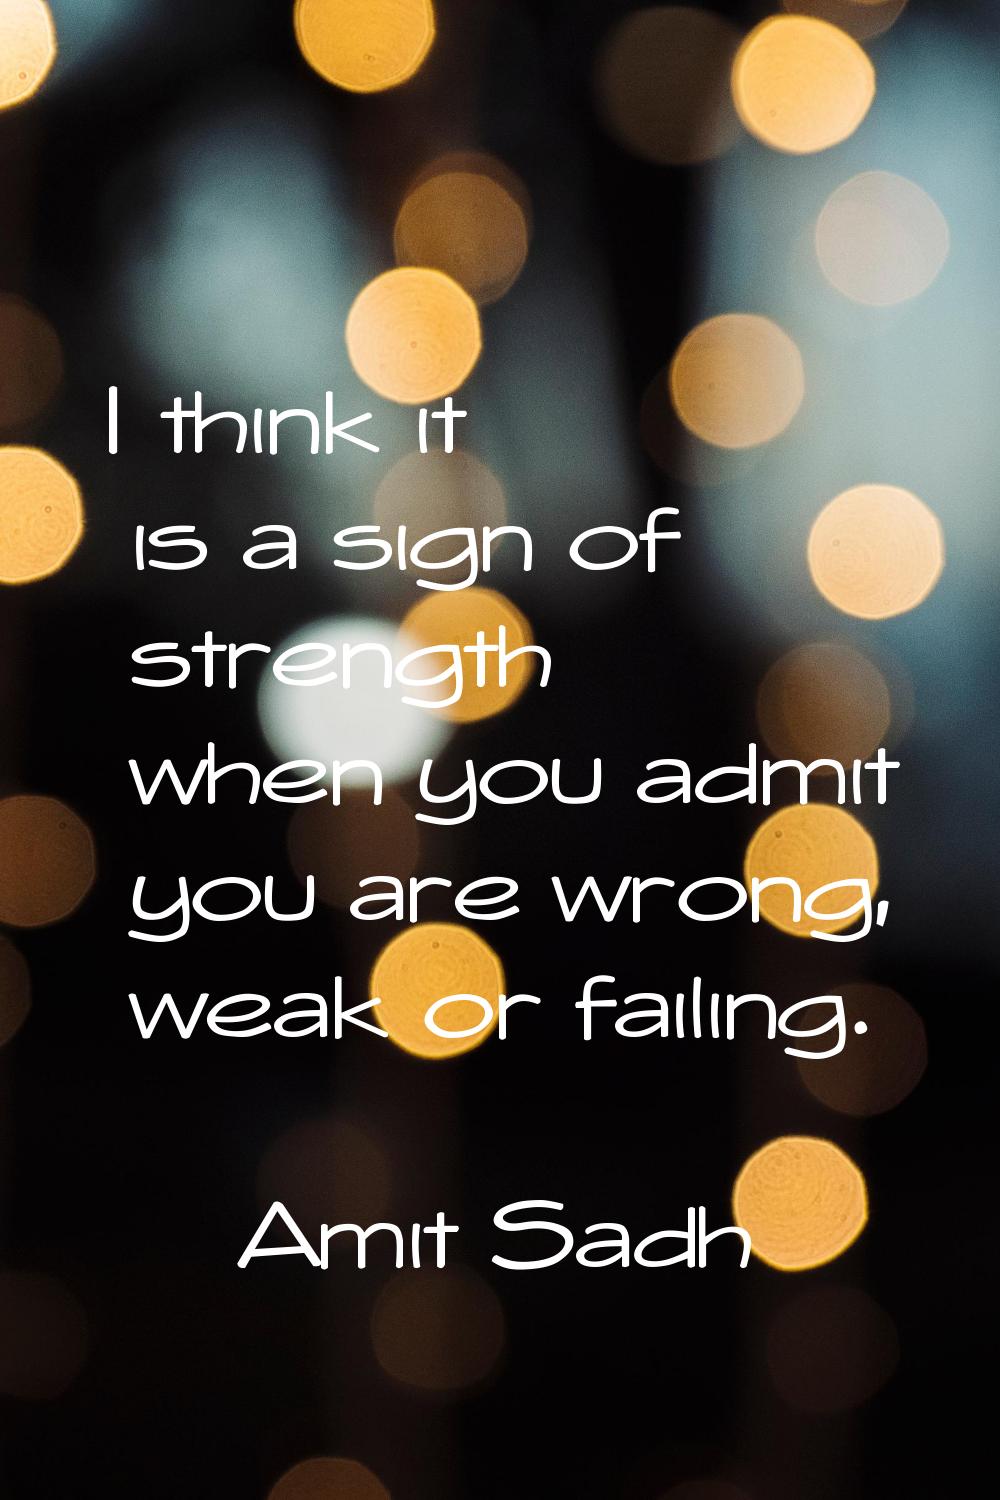 I think it is a sign of strength when you admit you are wrong, weak or failing.